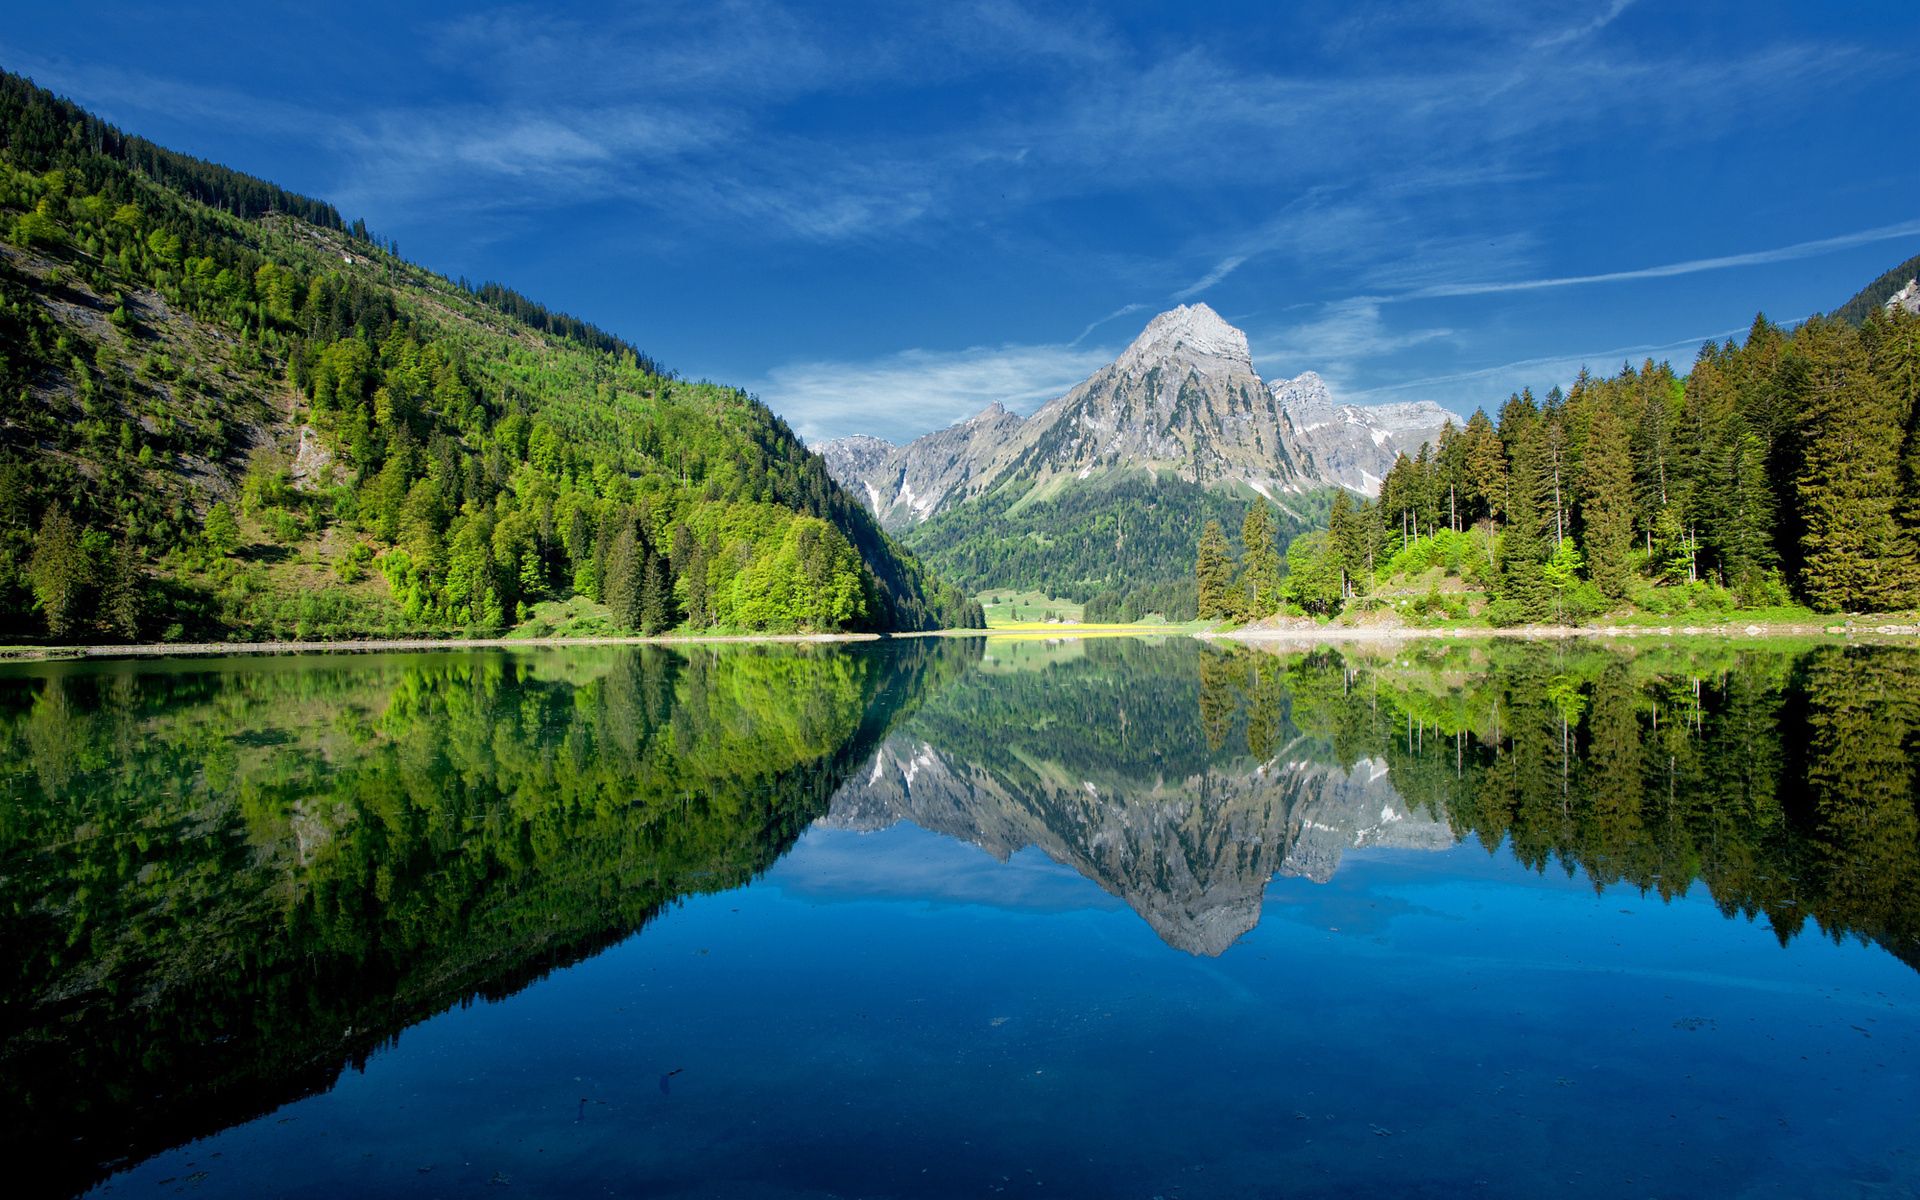 freshness, green, nature, mountains, clear, scaffolding, trees, sky, summer, blue, lake, reflection, i see, mirror, purity, woods